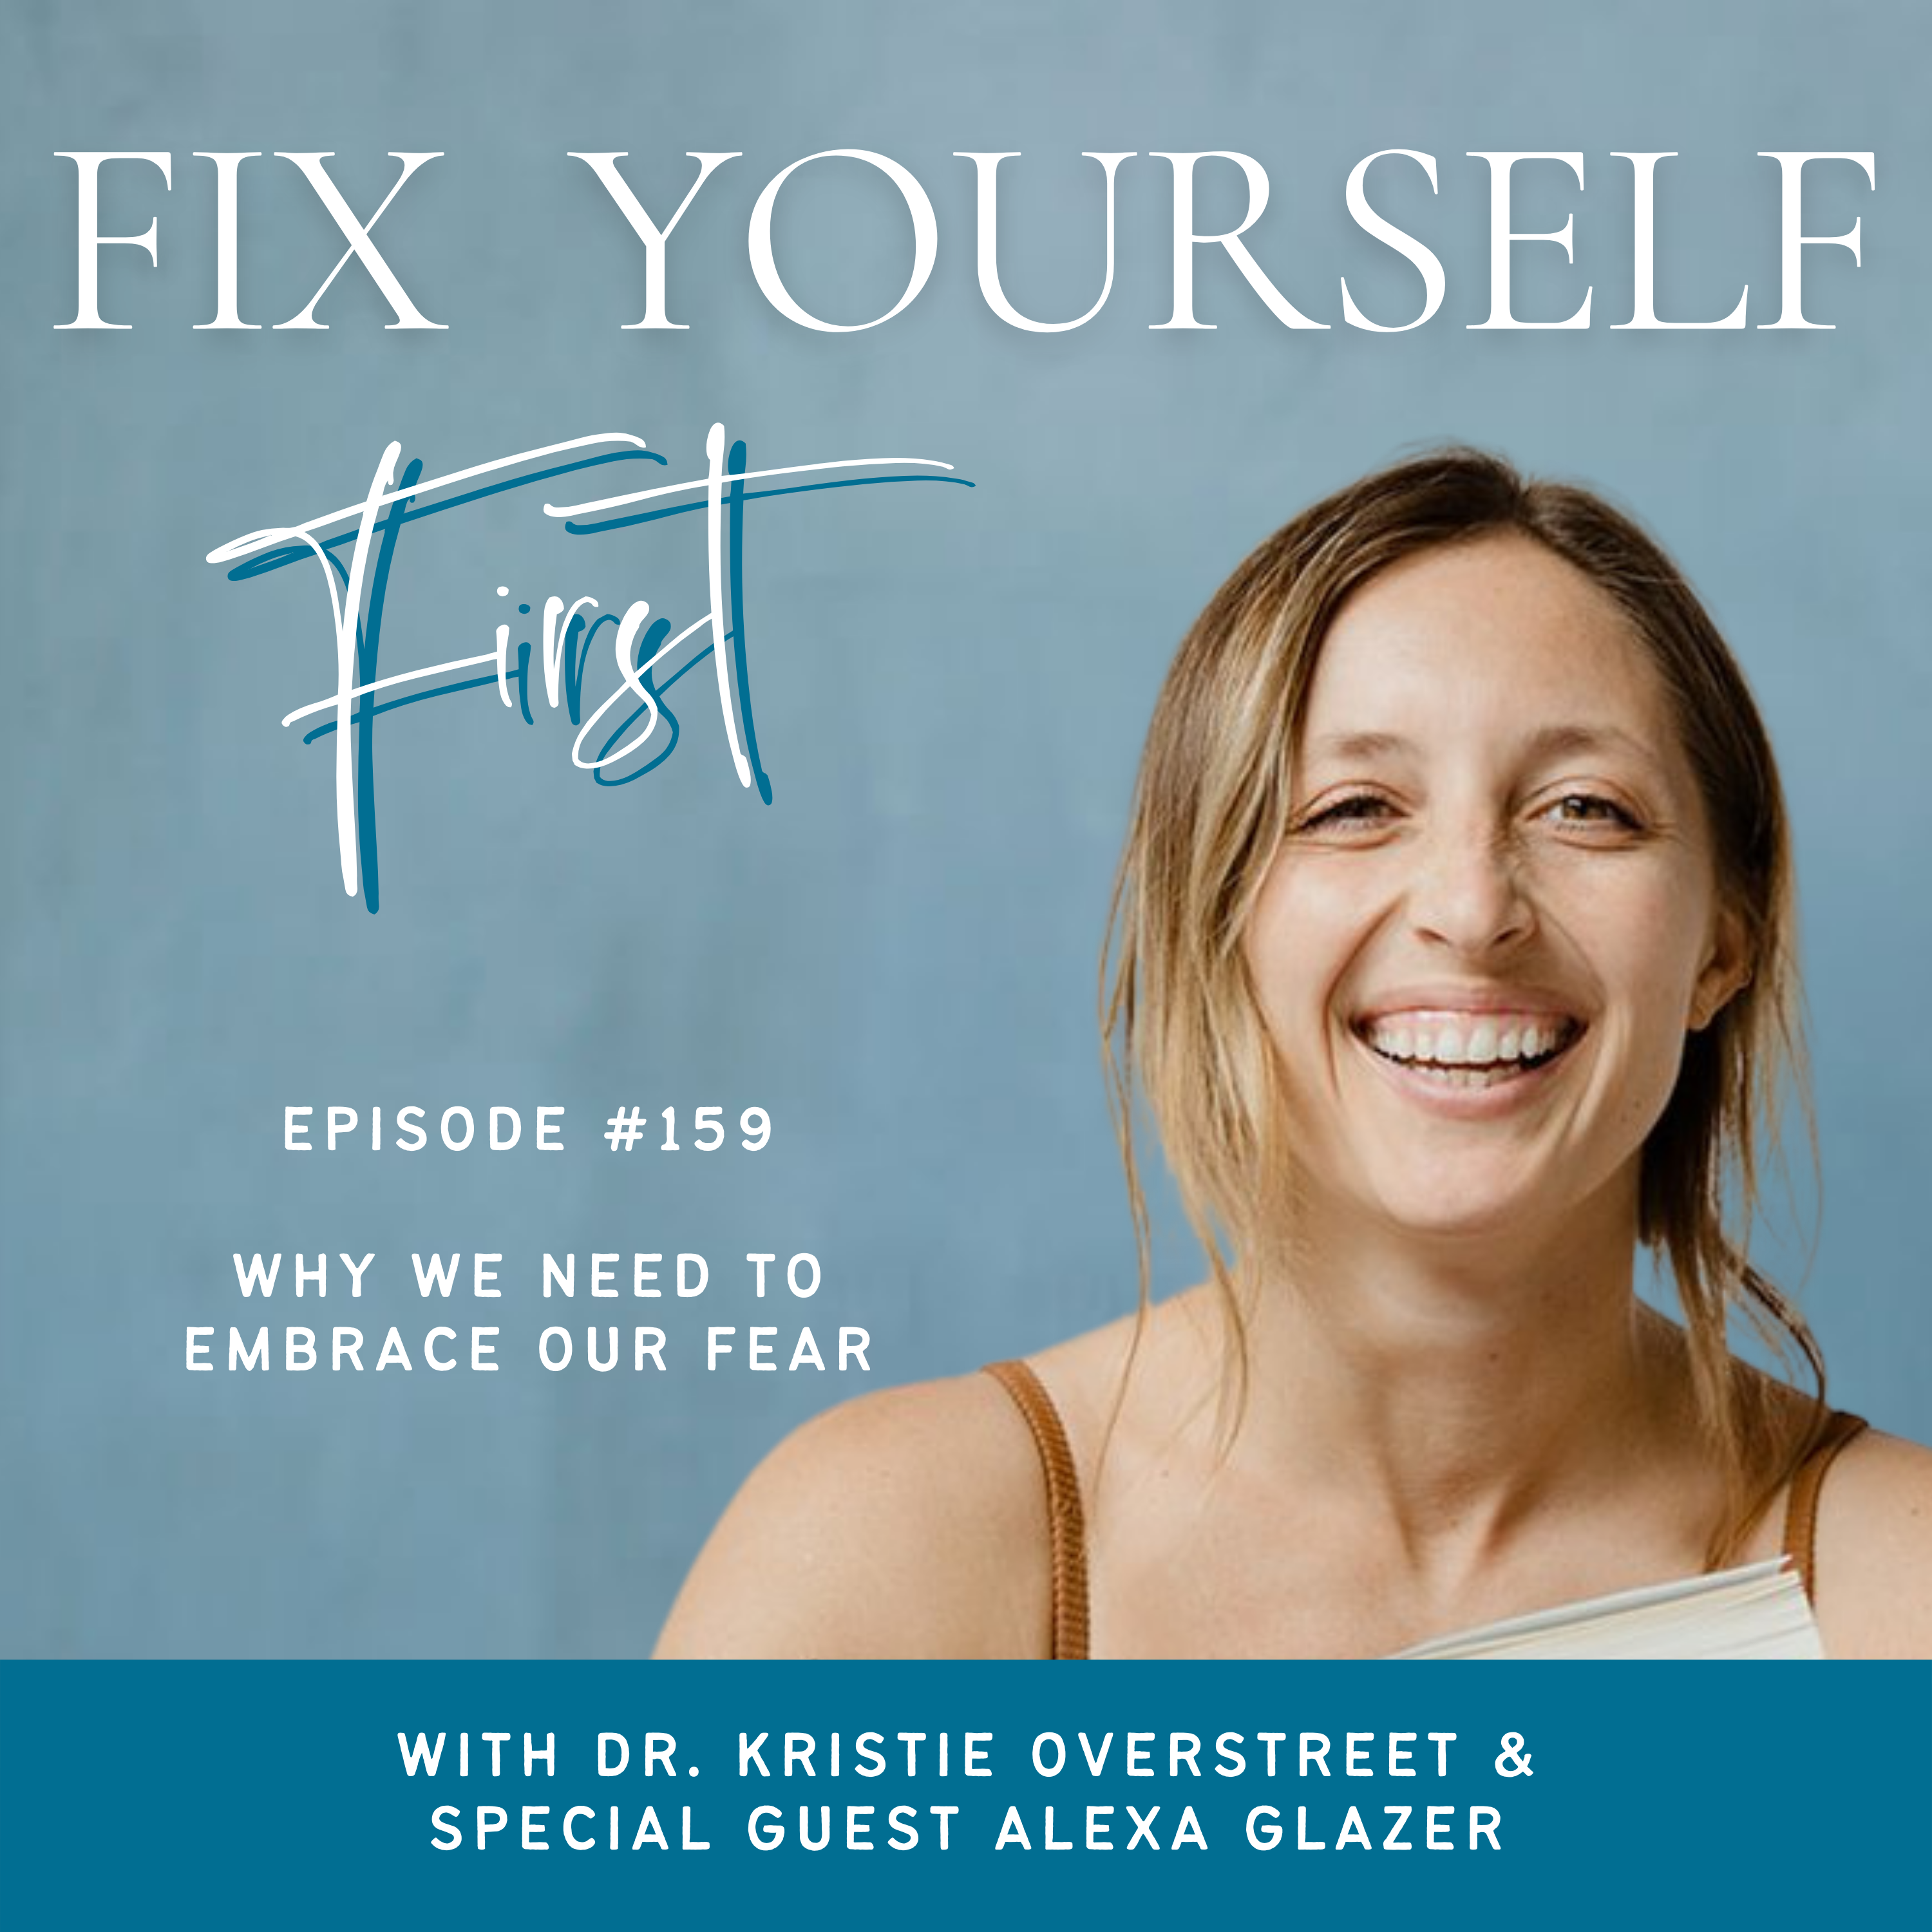 Fix Yourself First Episode 159 Why We Need to Embrace Our Fear with Alexa Glazer